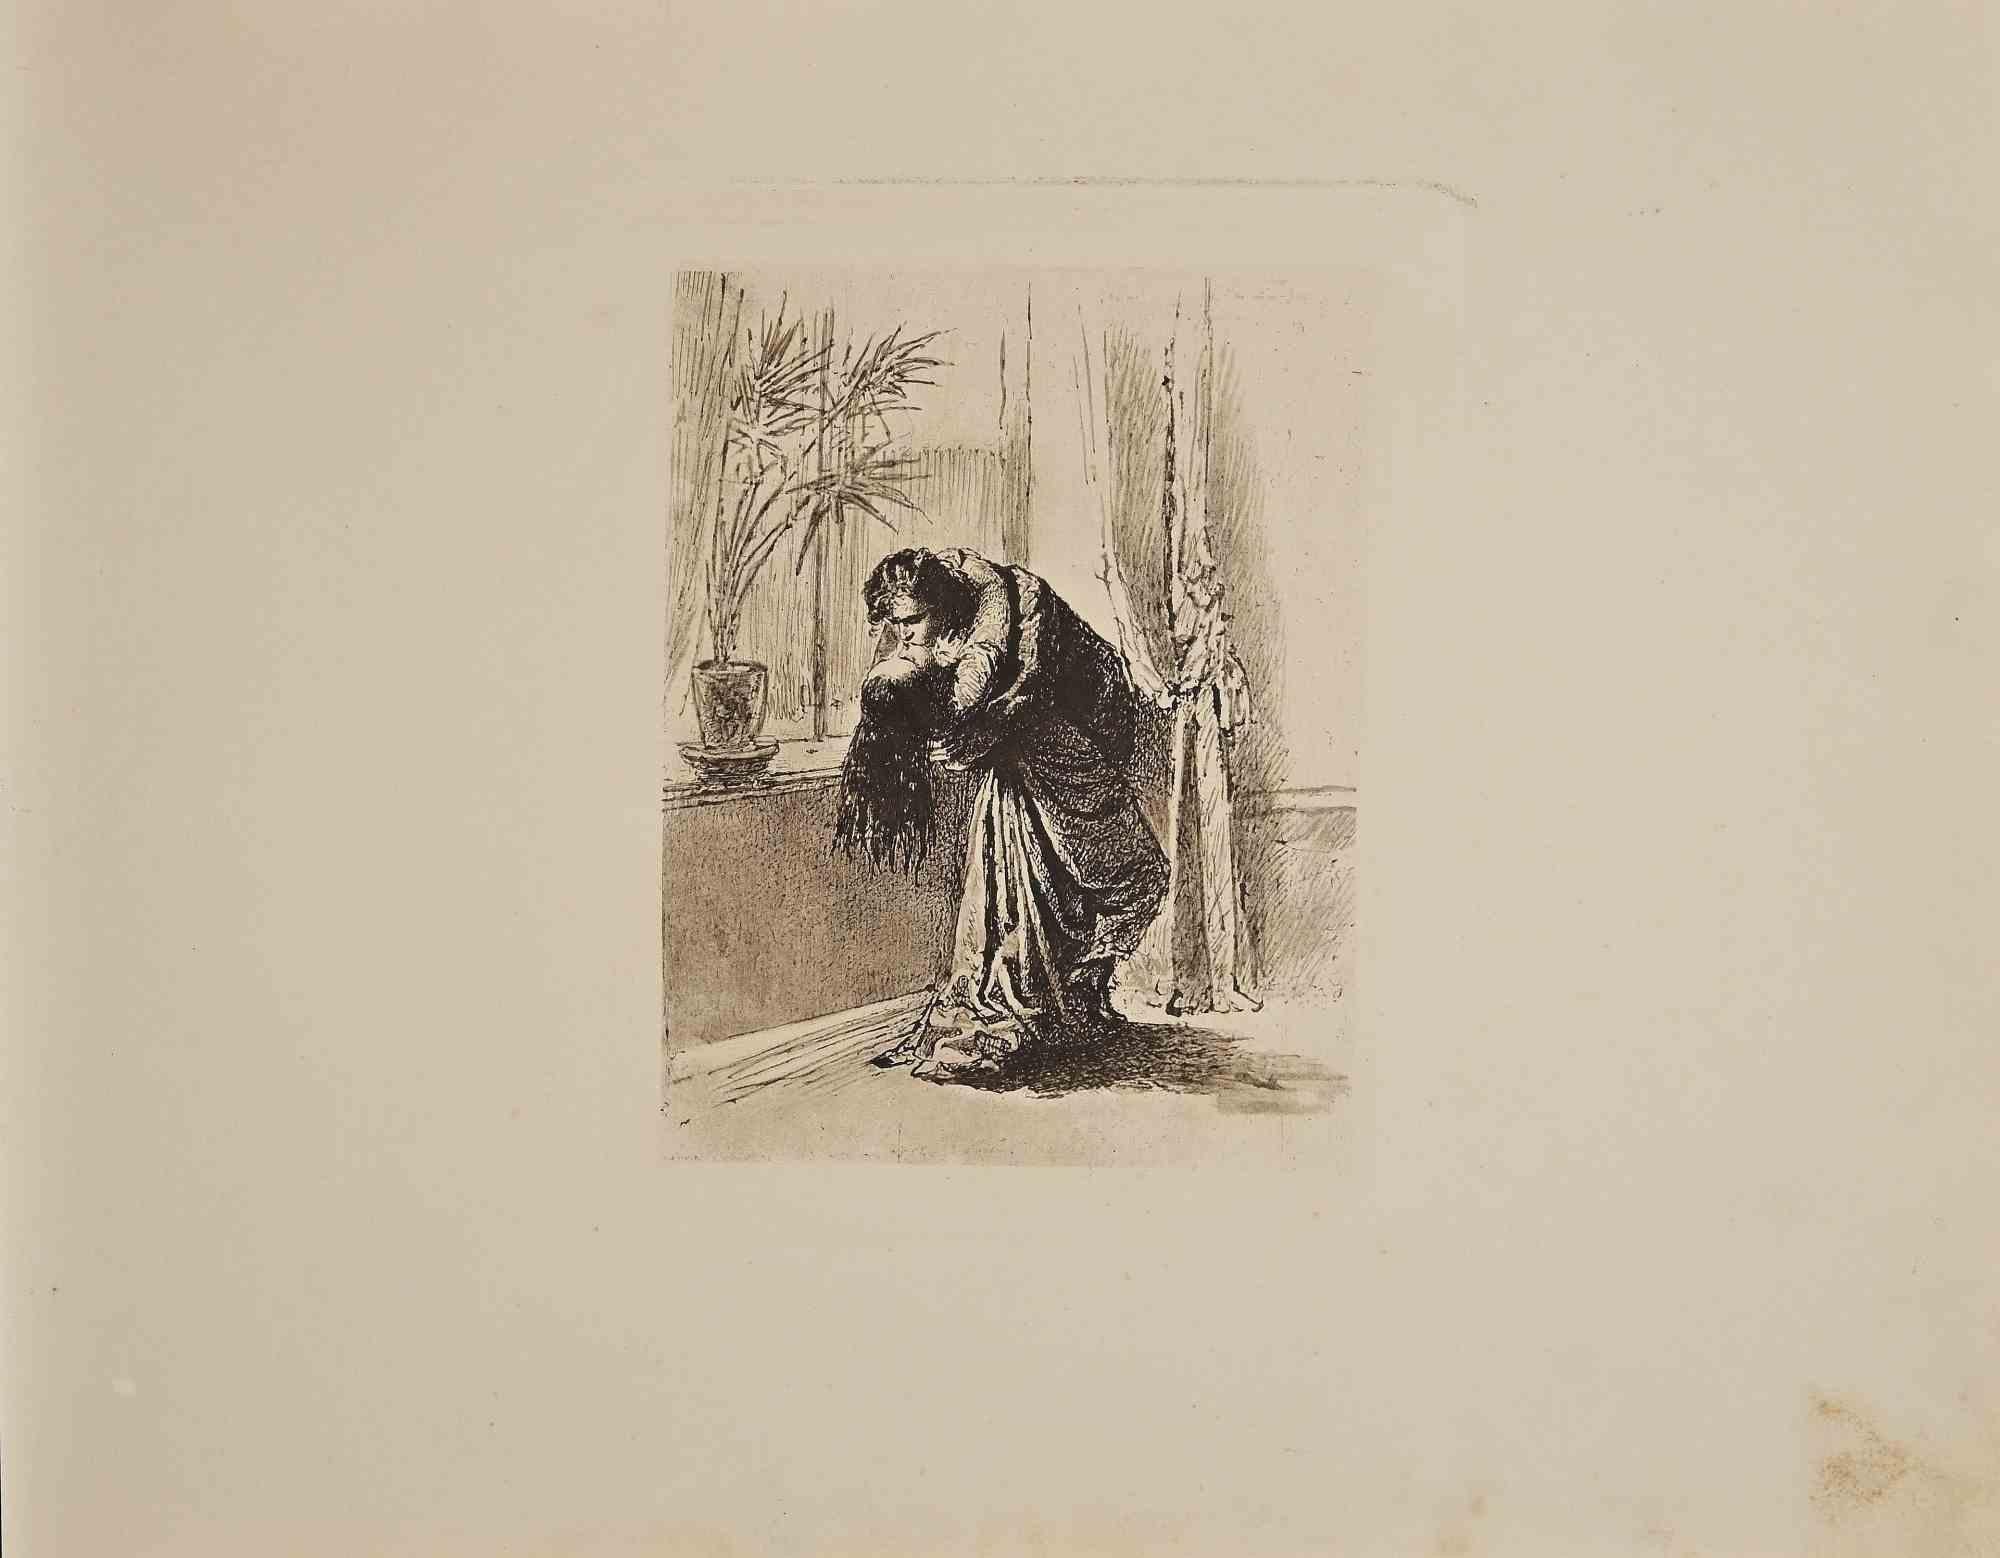 Erotic scene is an original Héliogravure artwork on ivory-colored paper, realized by Micheal Von Zichy in 1911.  Printed in only 300 copies, Leipzig; Privatdruck, from the Catalogue "Liebe" (Dear), Text in German on the plate,  The drawing created